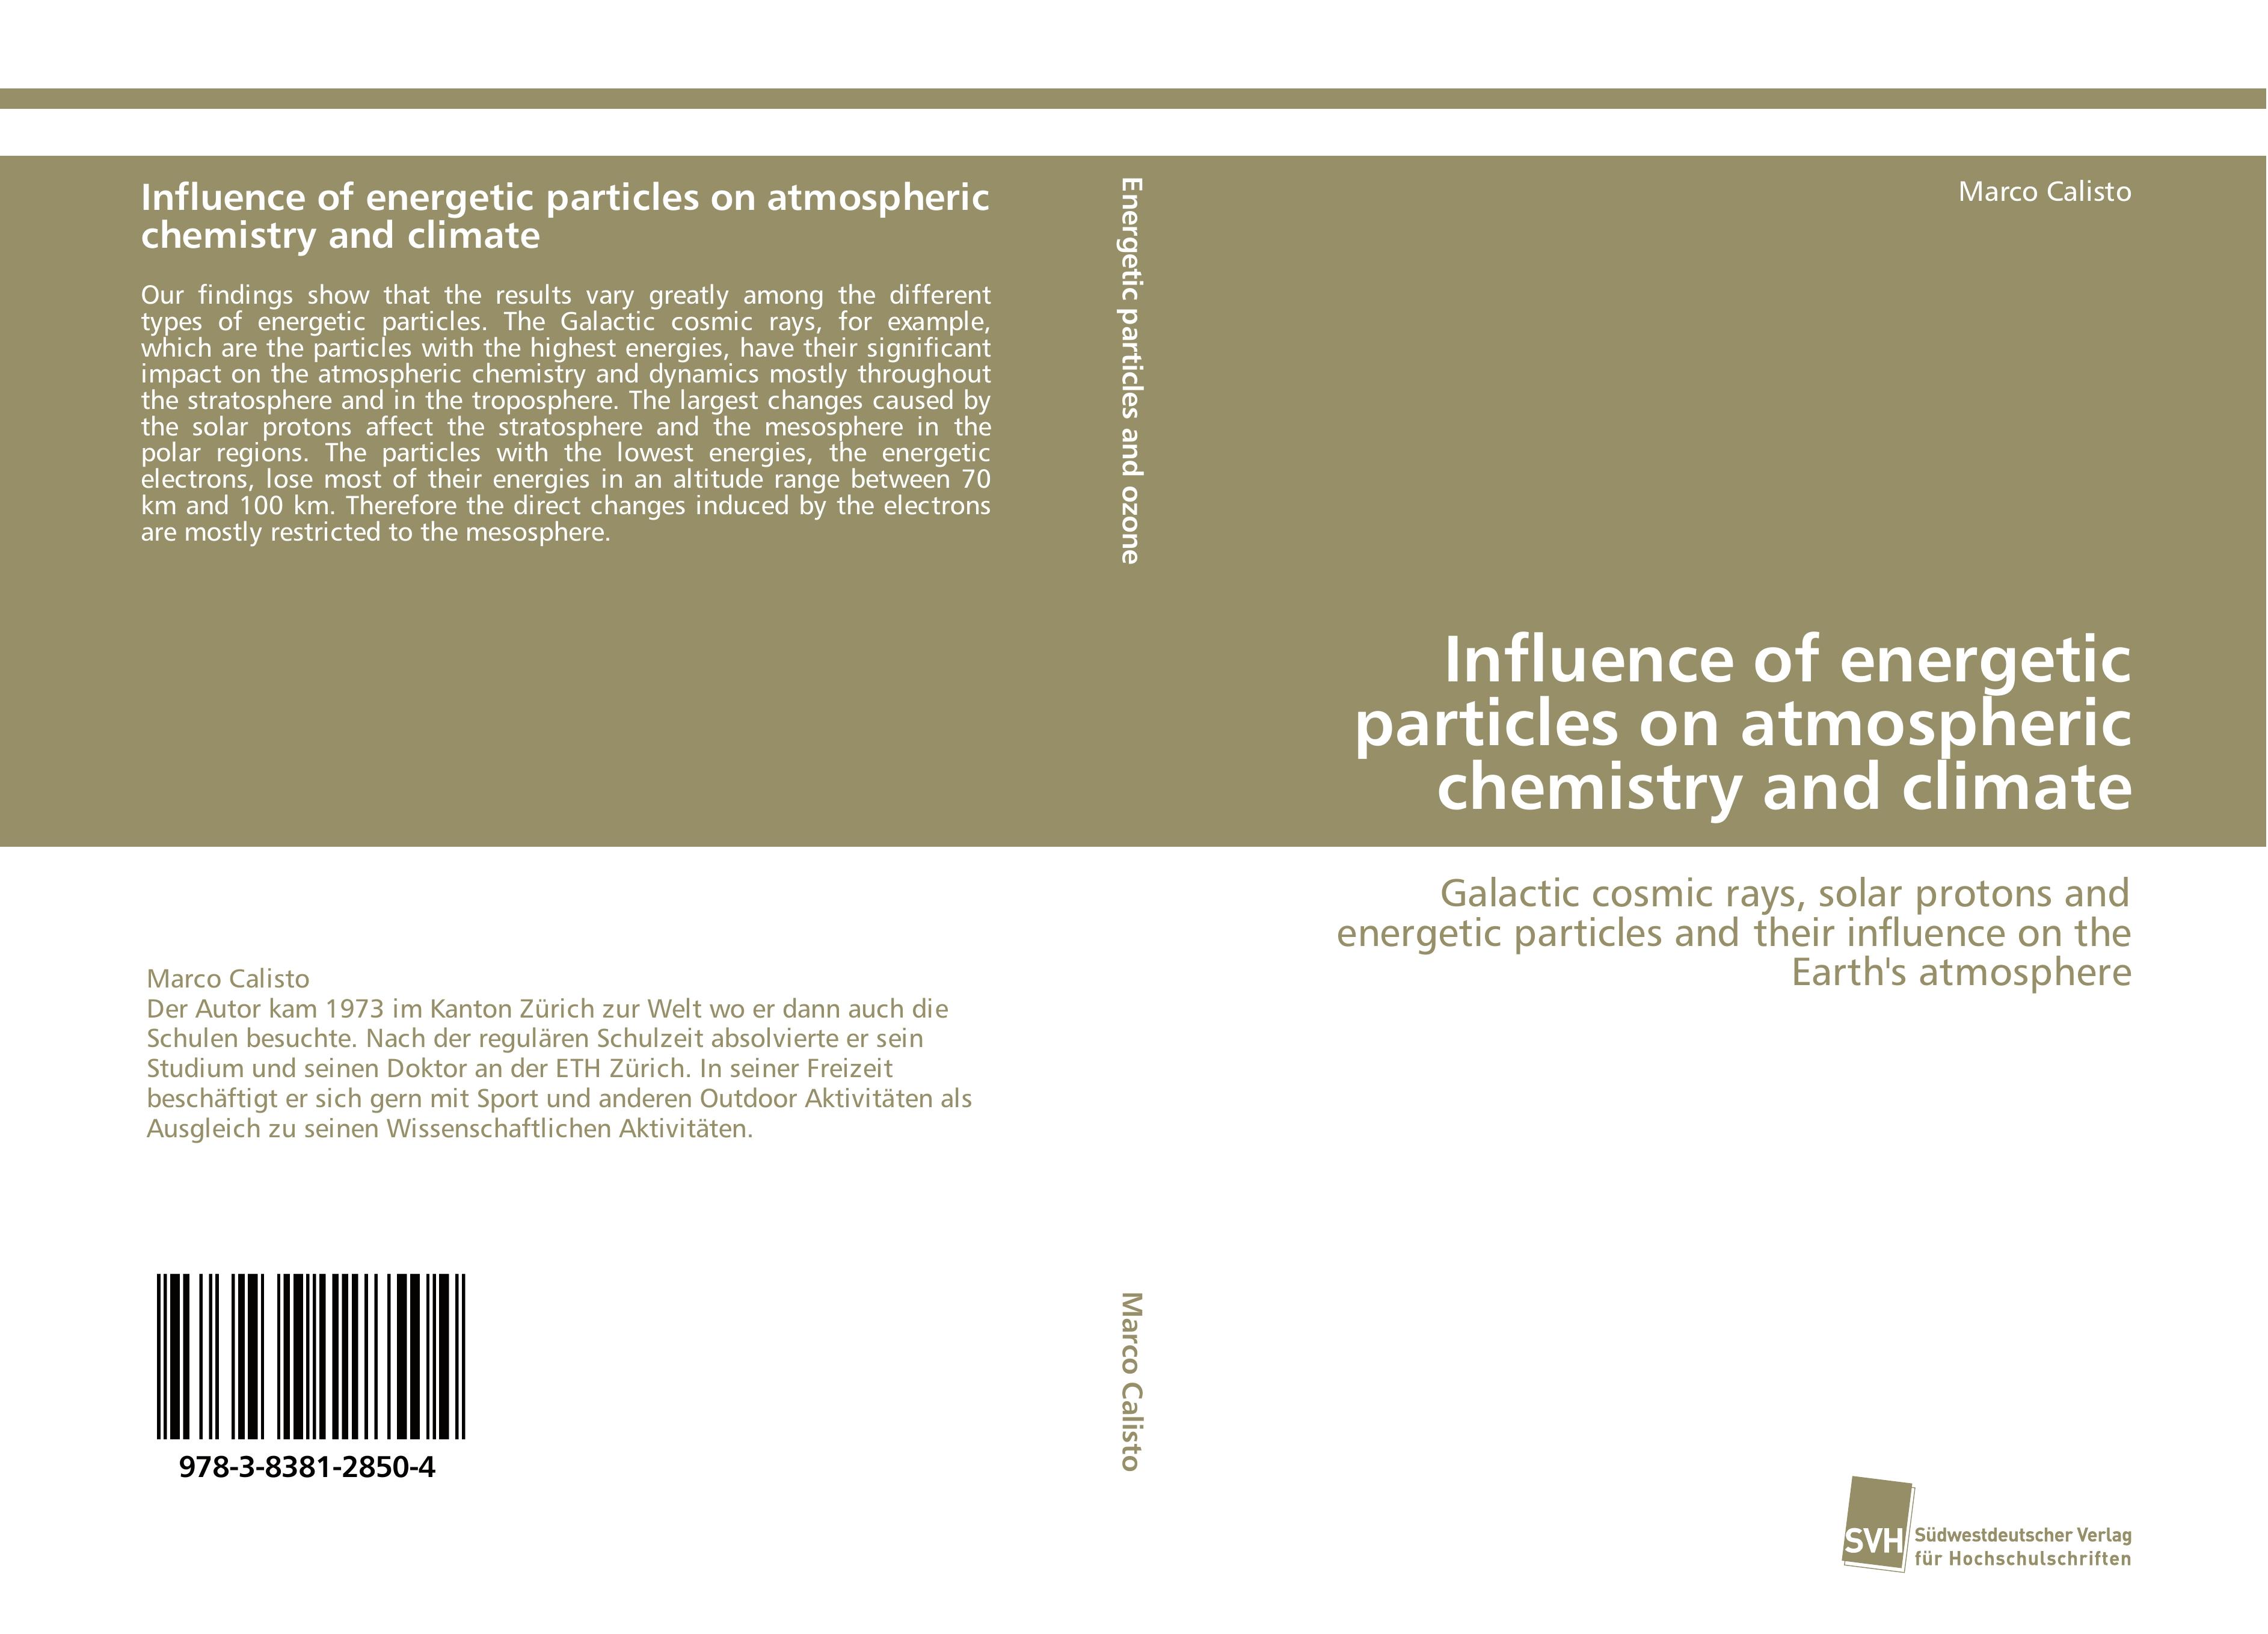 Influence of energetic particles on atmospheric chemistry and climate - Marco Calisto